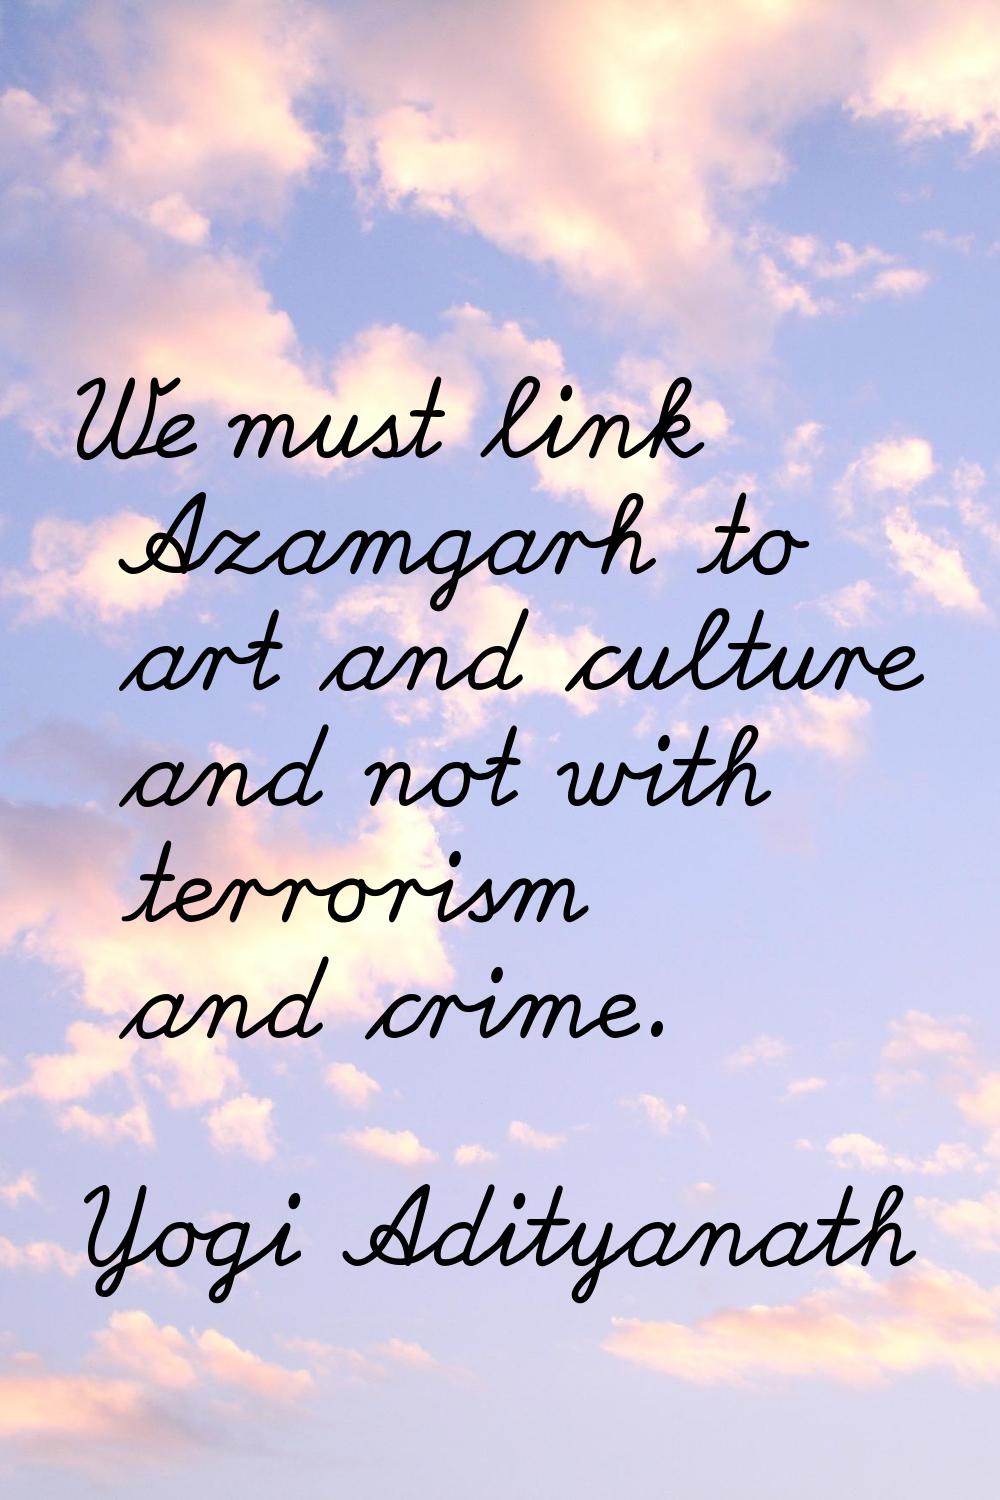 We must link Azamgarh to art and culture and not with terrorism and crime.